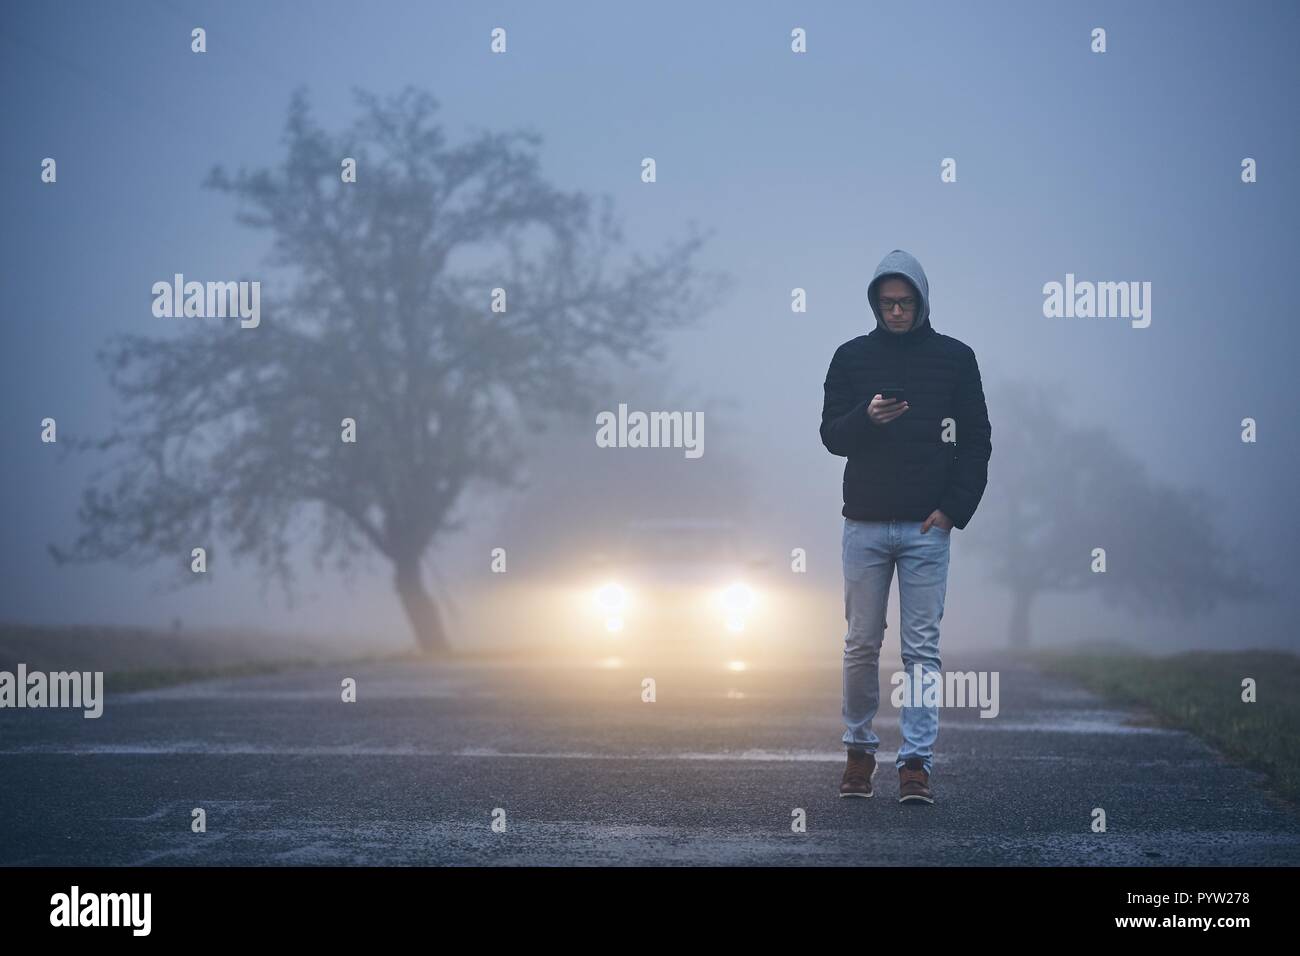 Young man walking on road and using phone. Car approaching in thick fog. Stock Photo